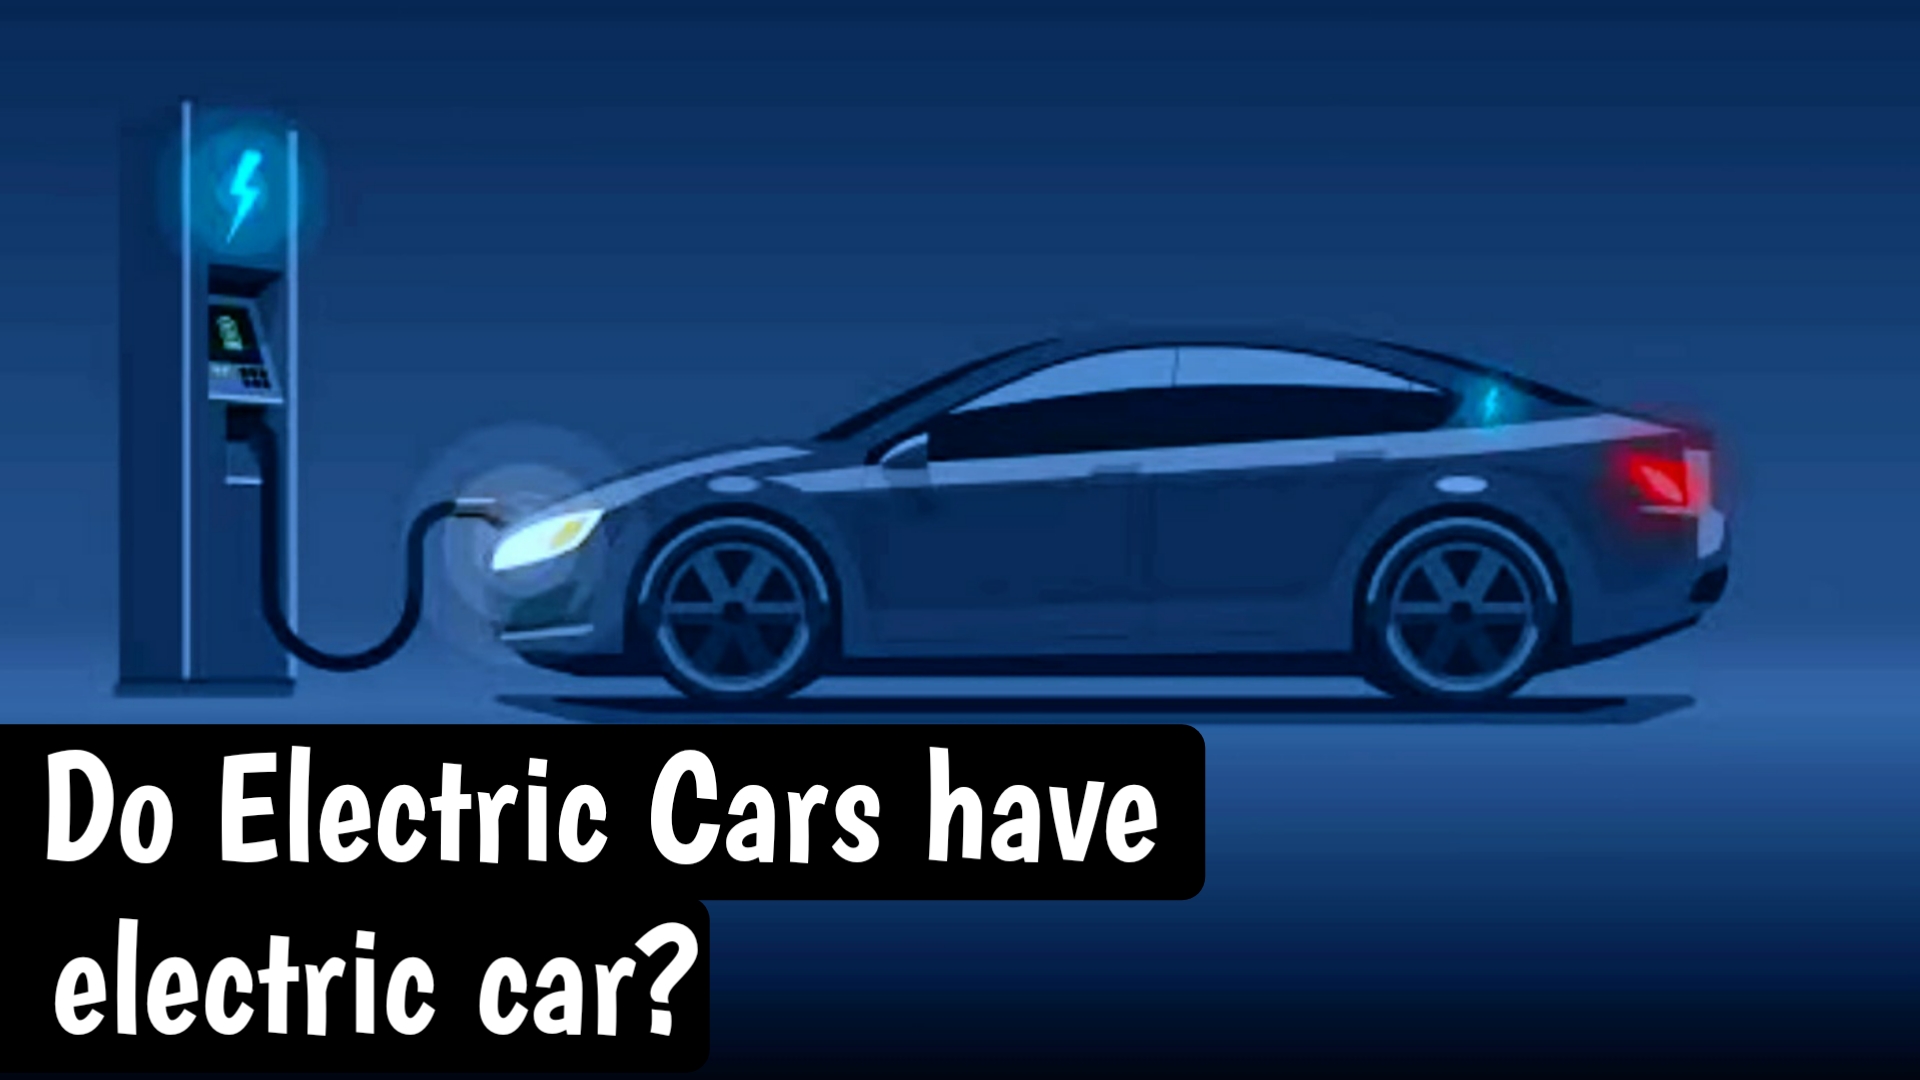 Do electric cars have exhaust pipes?